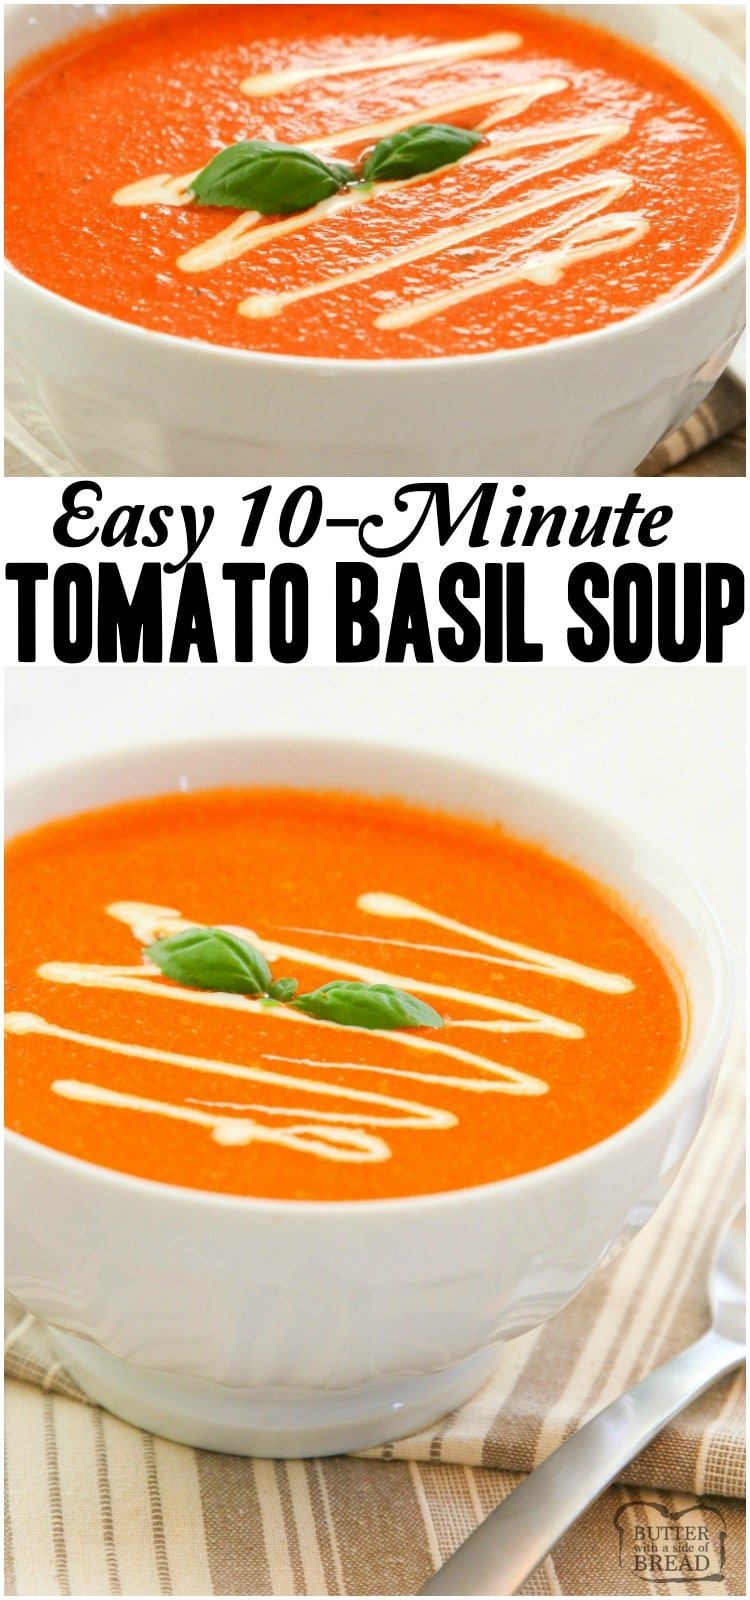 Easy 10-Minute Tomato Basil Soup recipe made with San Marzano style tomatoes, broth, fresh basil & butter. Smooth & tangy tomato soup that comes together fast. Perfect for a quick weeknight meal or lunch.